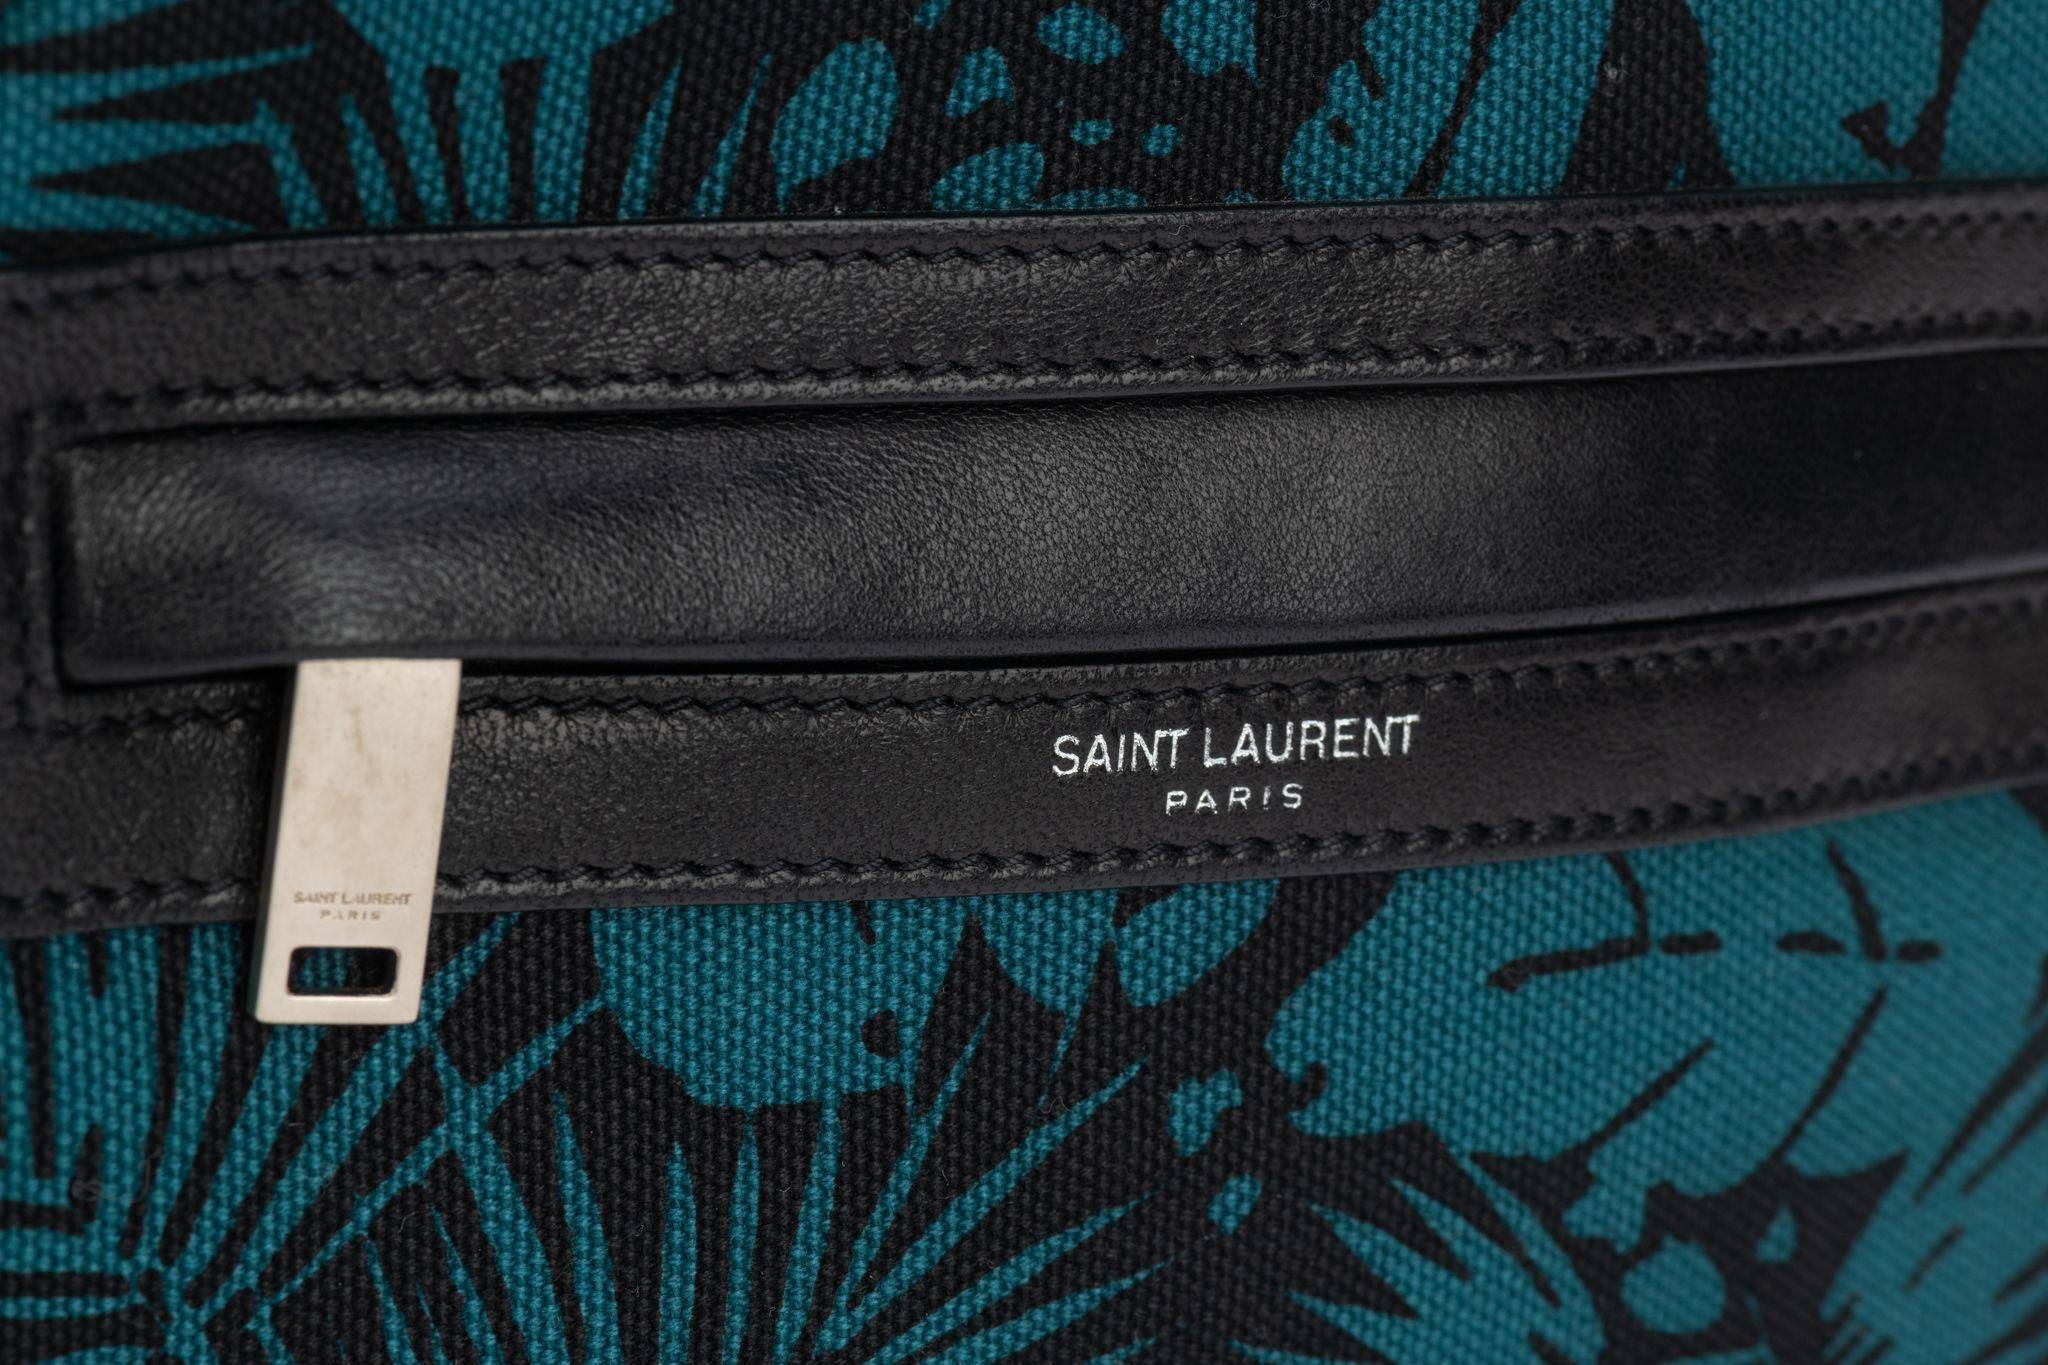 Saint Laurent canvas crossbody bag with palm print. The edges are trimmed with a Black Leather trim and comes with a strap. Shoulder drop 19”. The hardware is in silver. Its new and comes with booklet and dust bag.